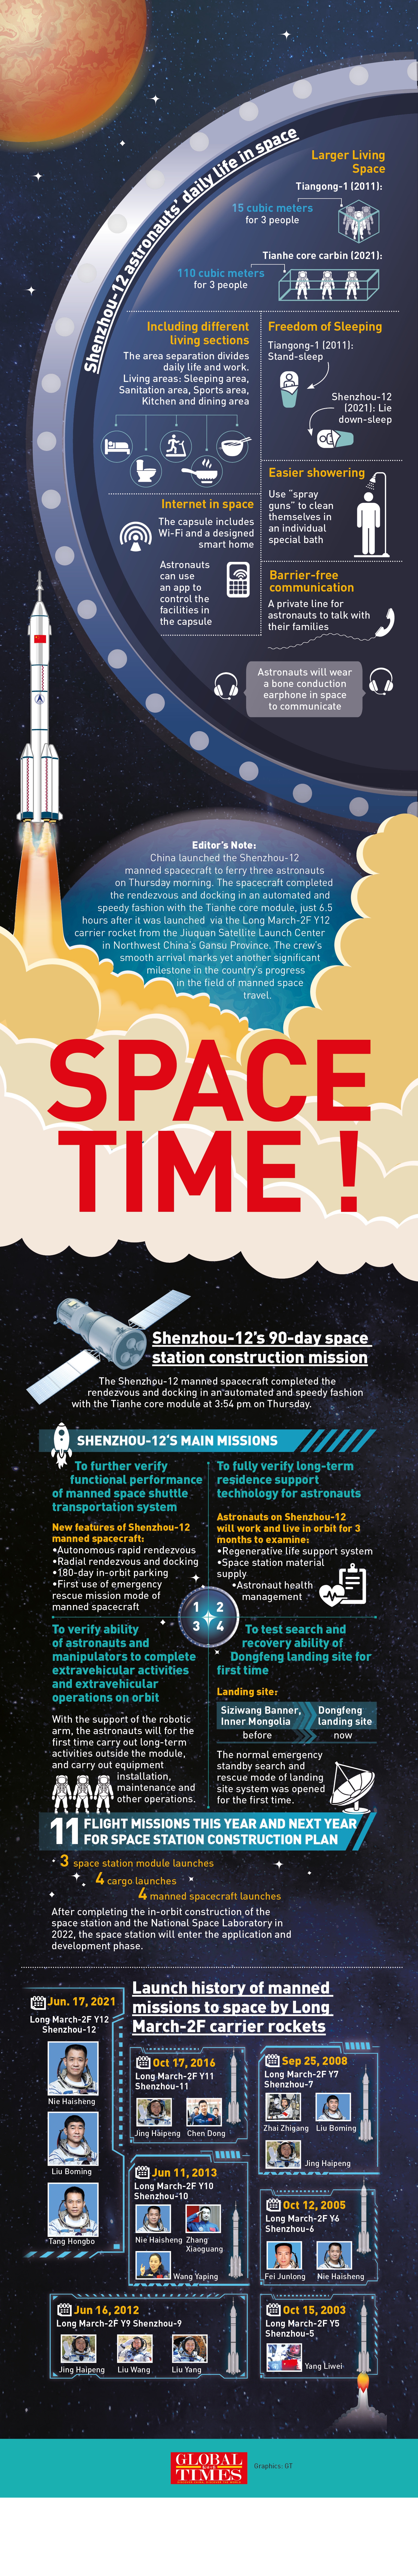 China's space station core module receives first group of residents - Global Times